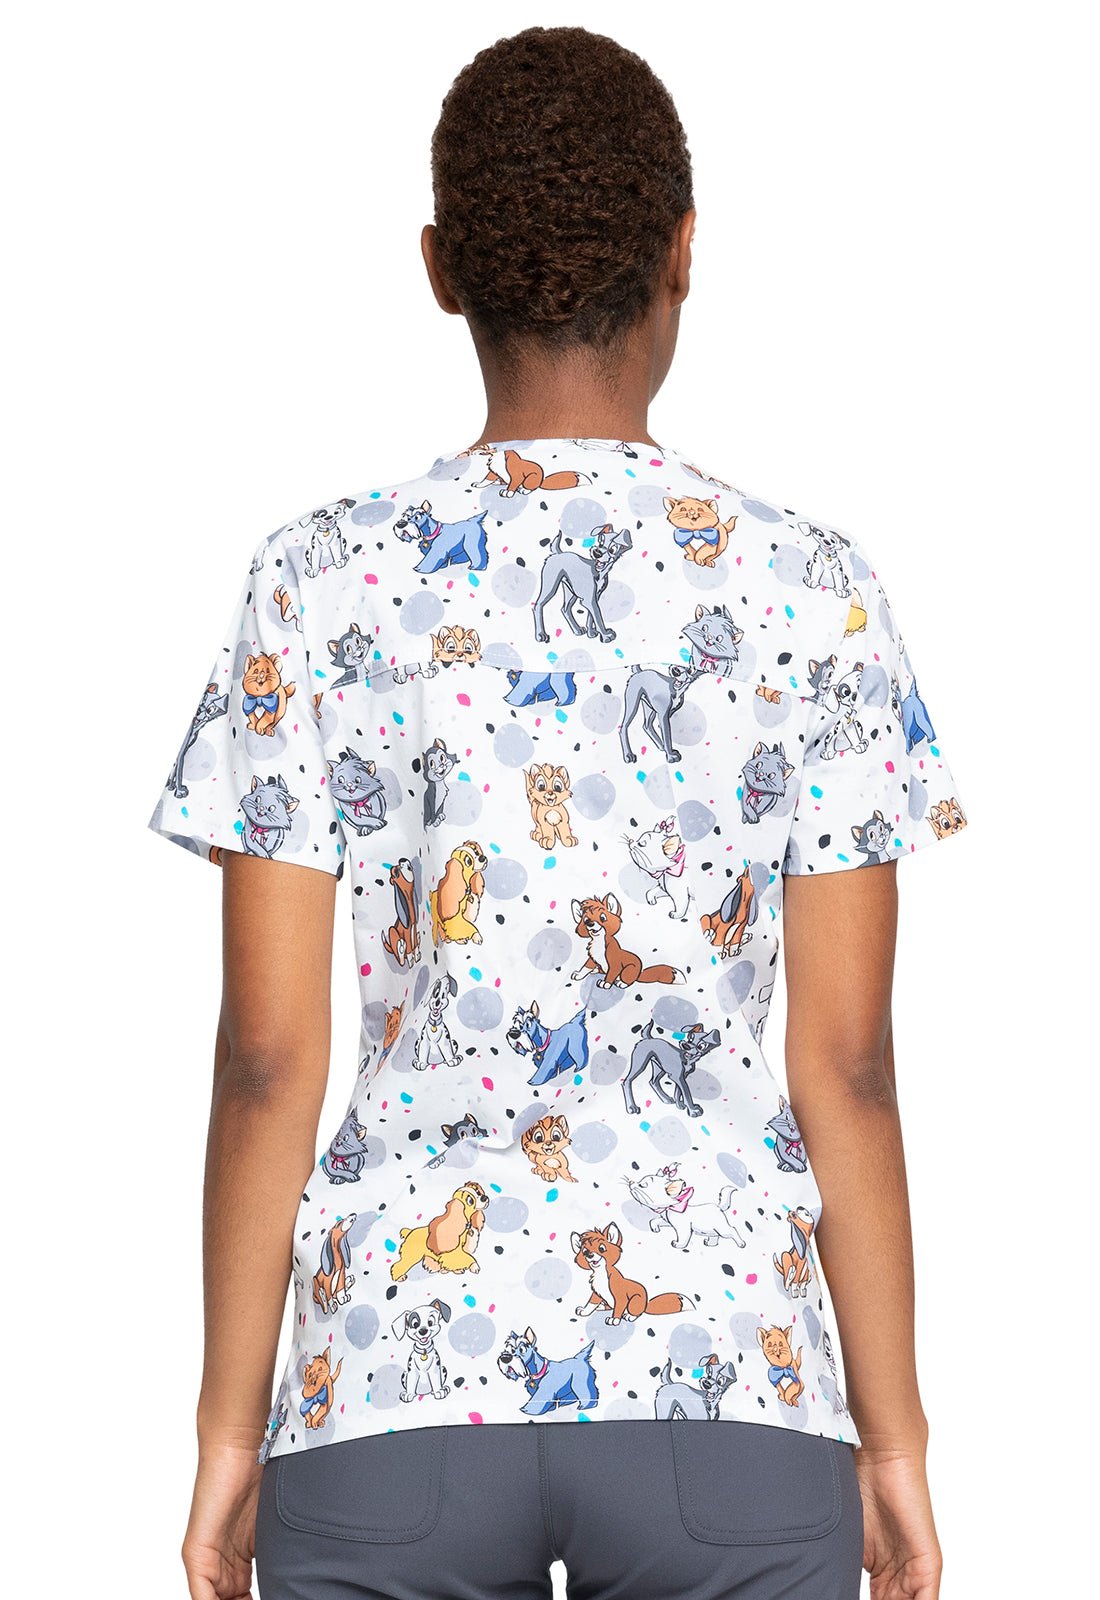 Lady and the Tramp Tooniforms Licensed Disney V Neck Scrub Top TF738 LACD - Scrubs Select